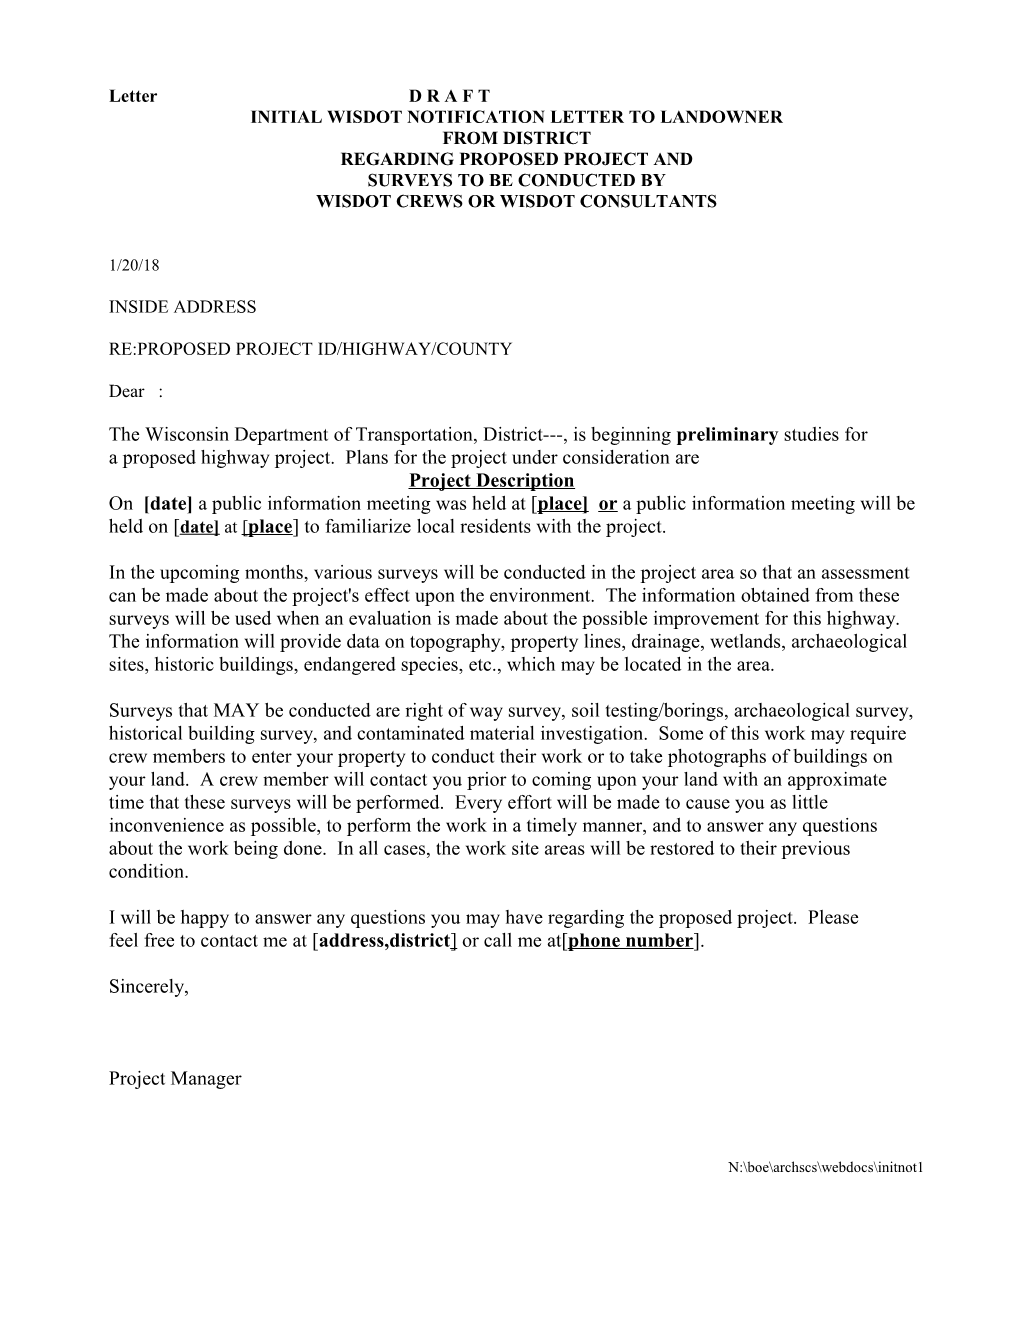 Initial Wisdot Notification Letter to Landowner from District Regarding Proposed Project